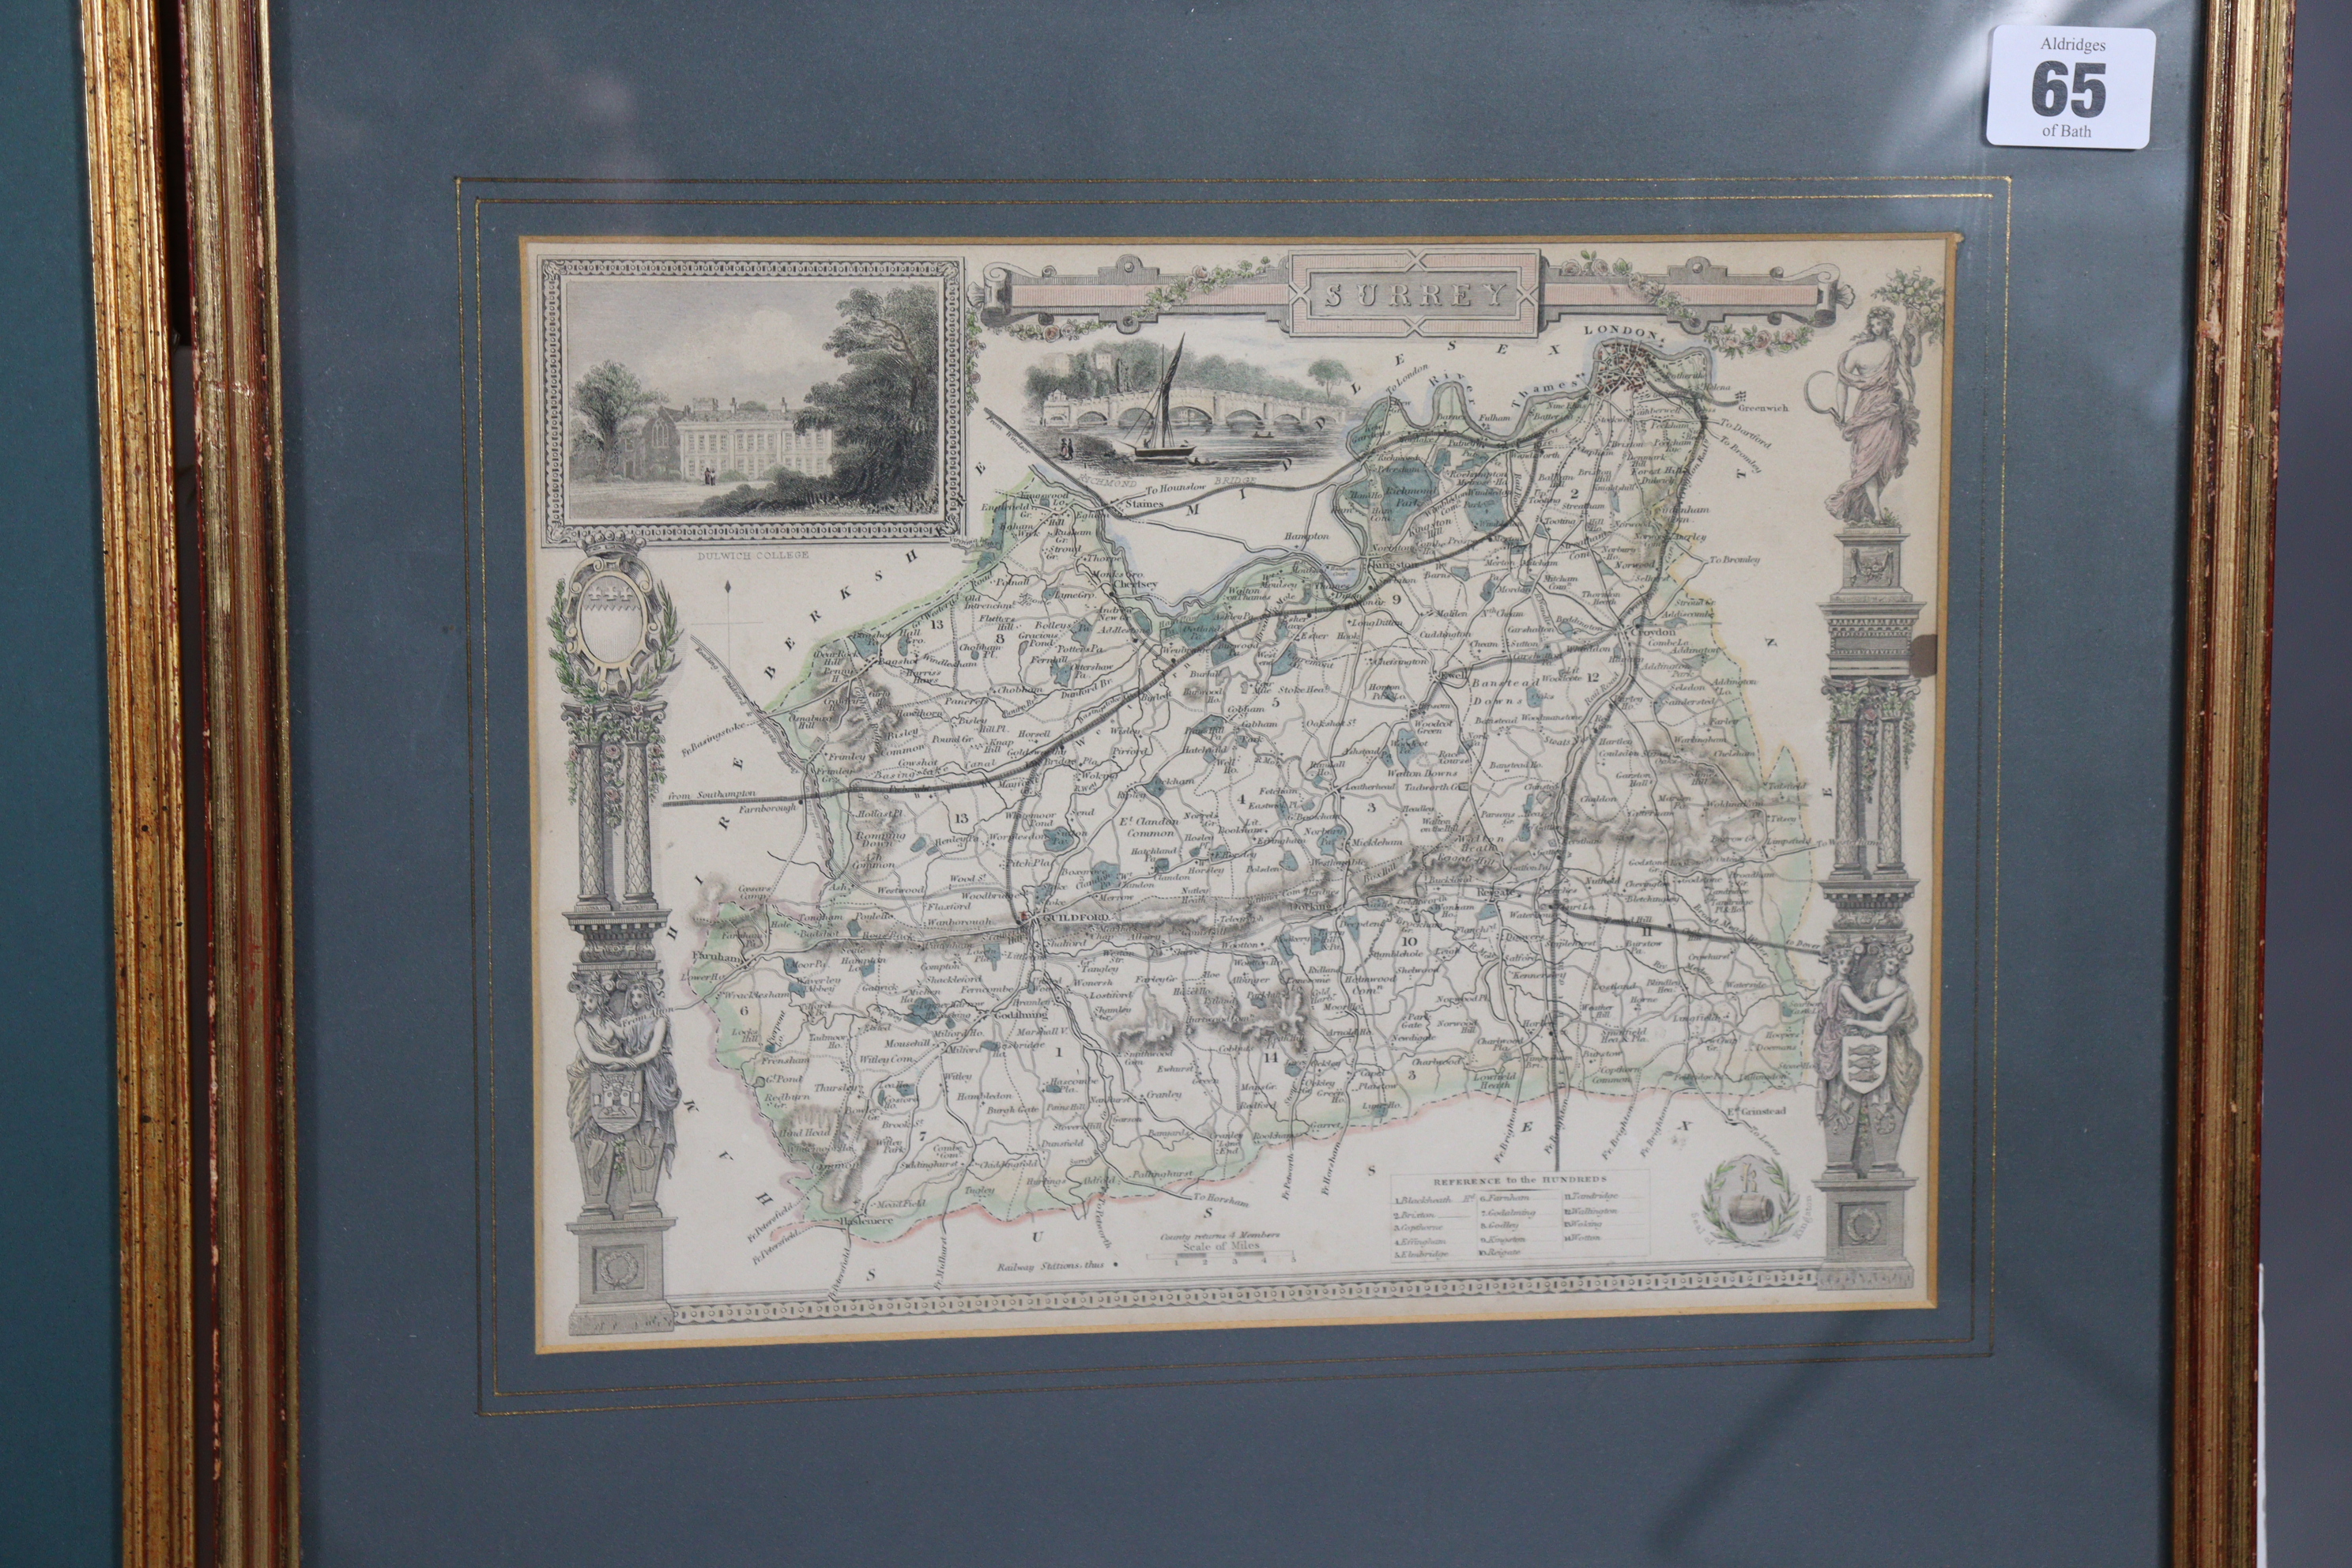 Four 19th century hand-coloured maps “Durham”, “Isle of Wight”, “Kent”, & “Surrey”, 8” x 10”, each - Image 5 of 5